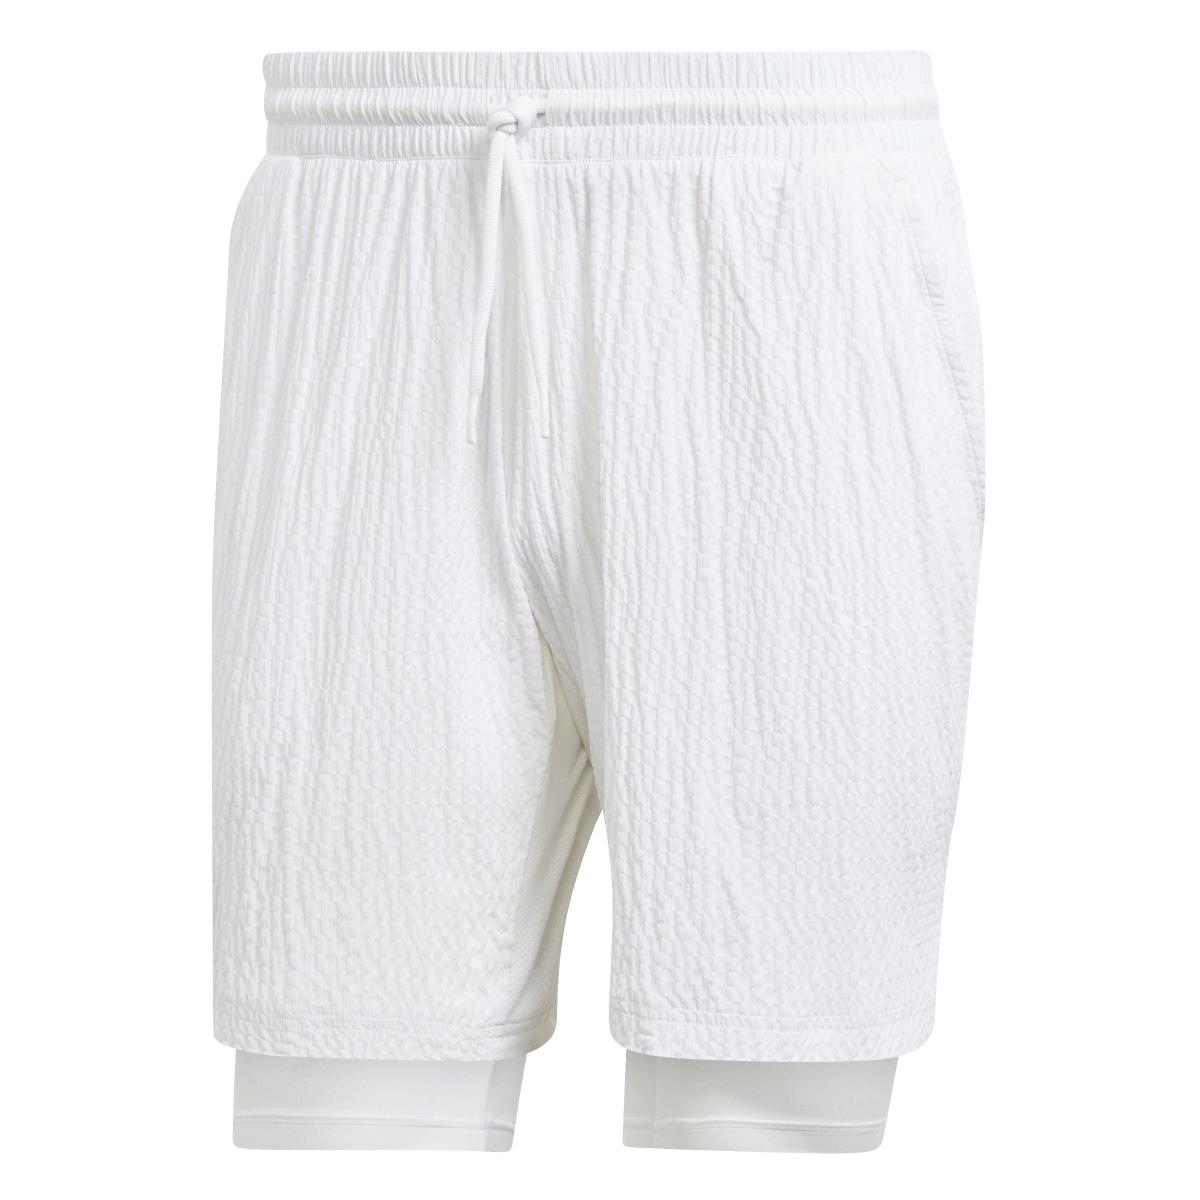 Adidas takes a unique approach to its 2023 Wimbledon tennis shorts ...